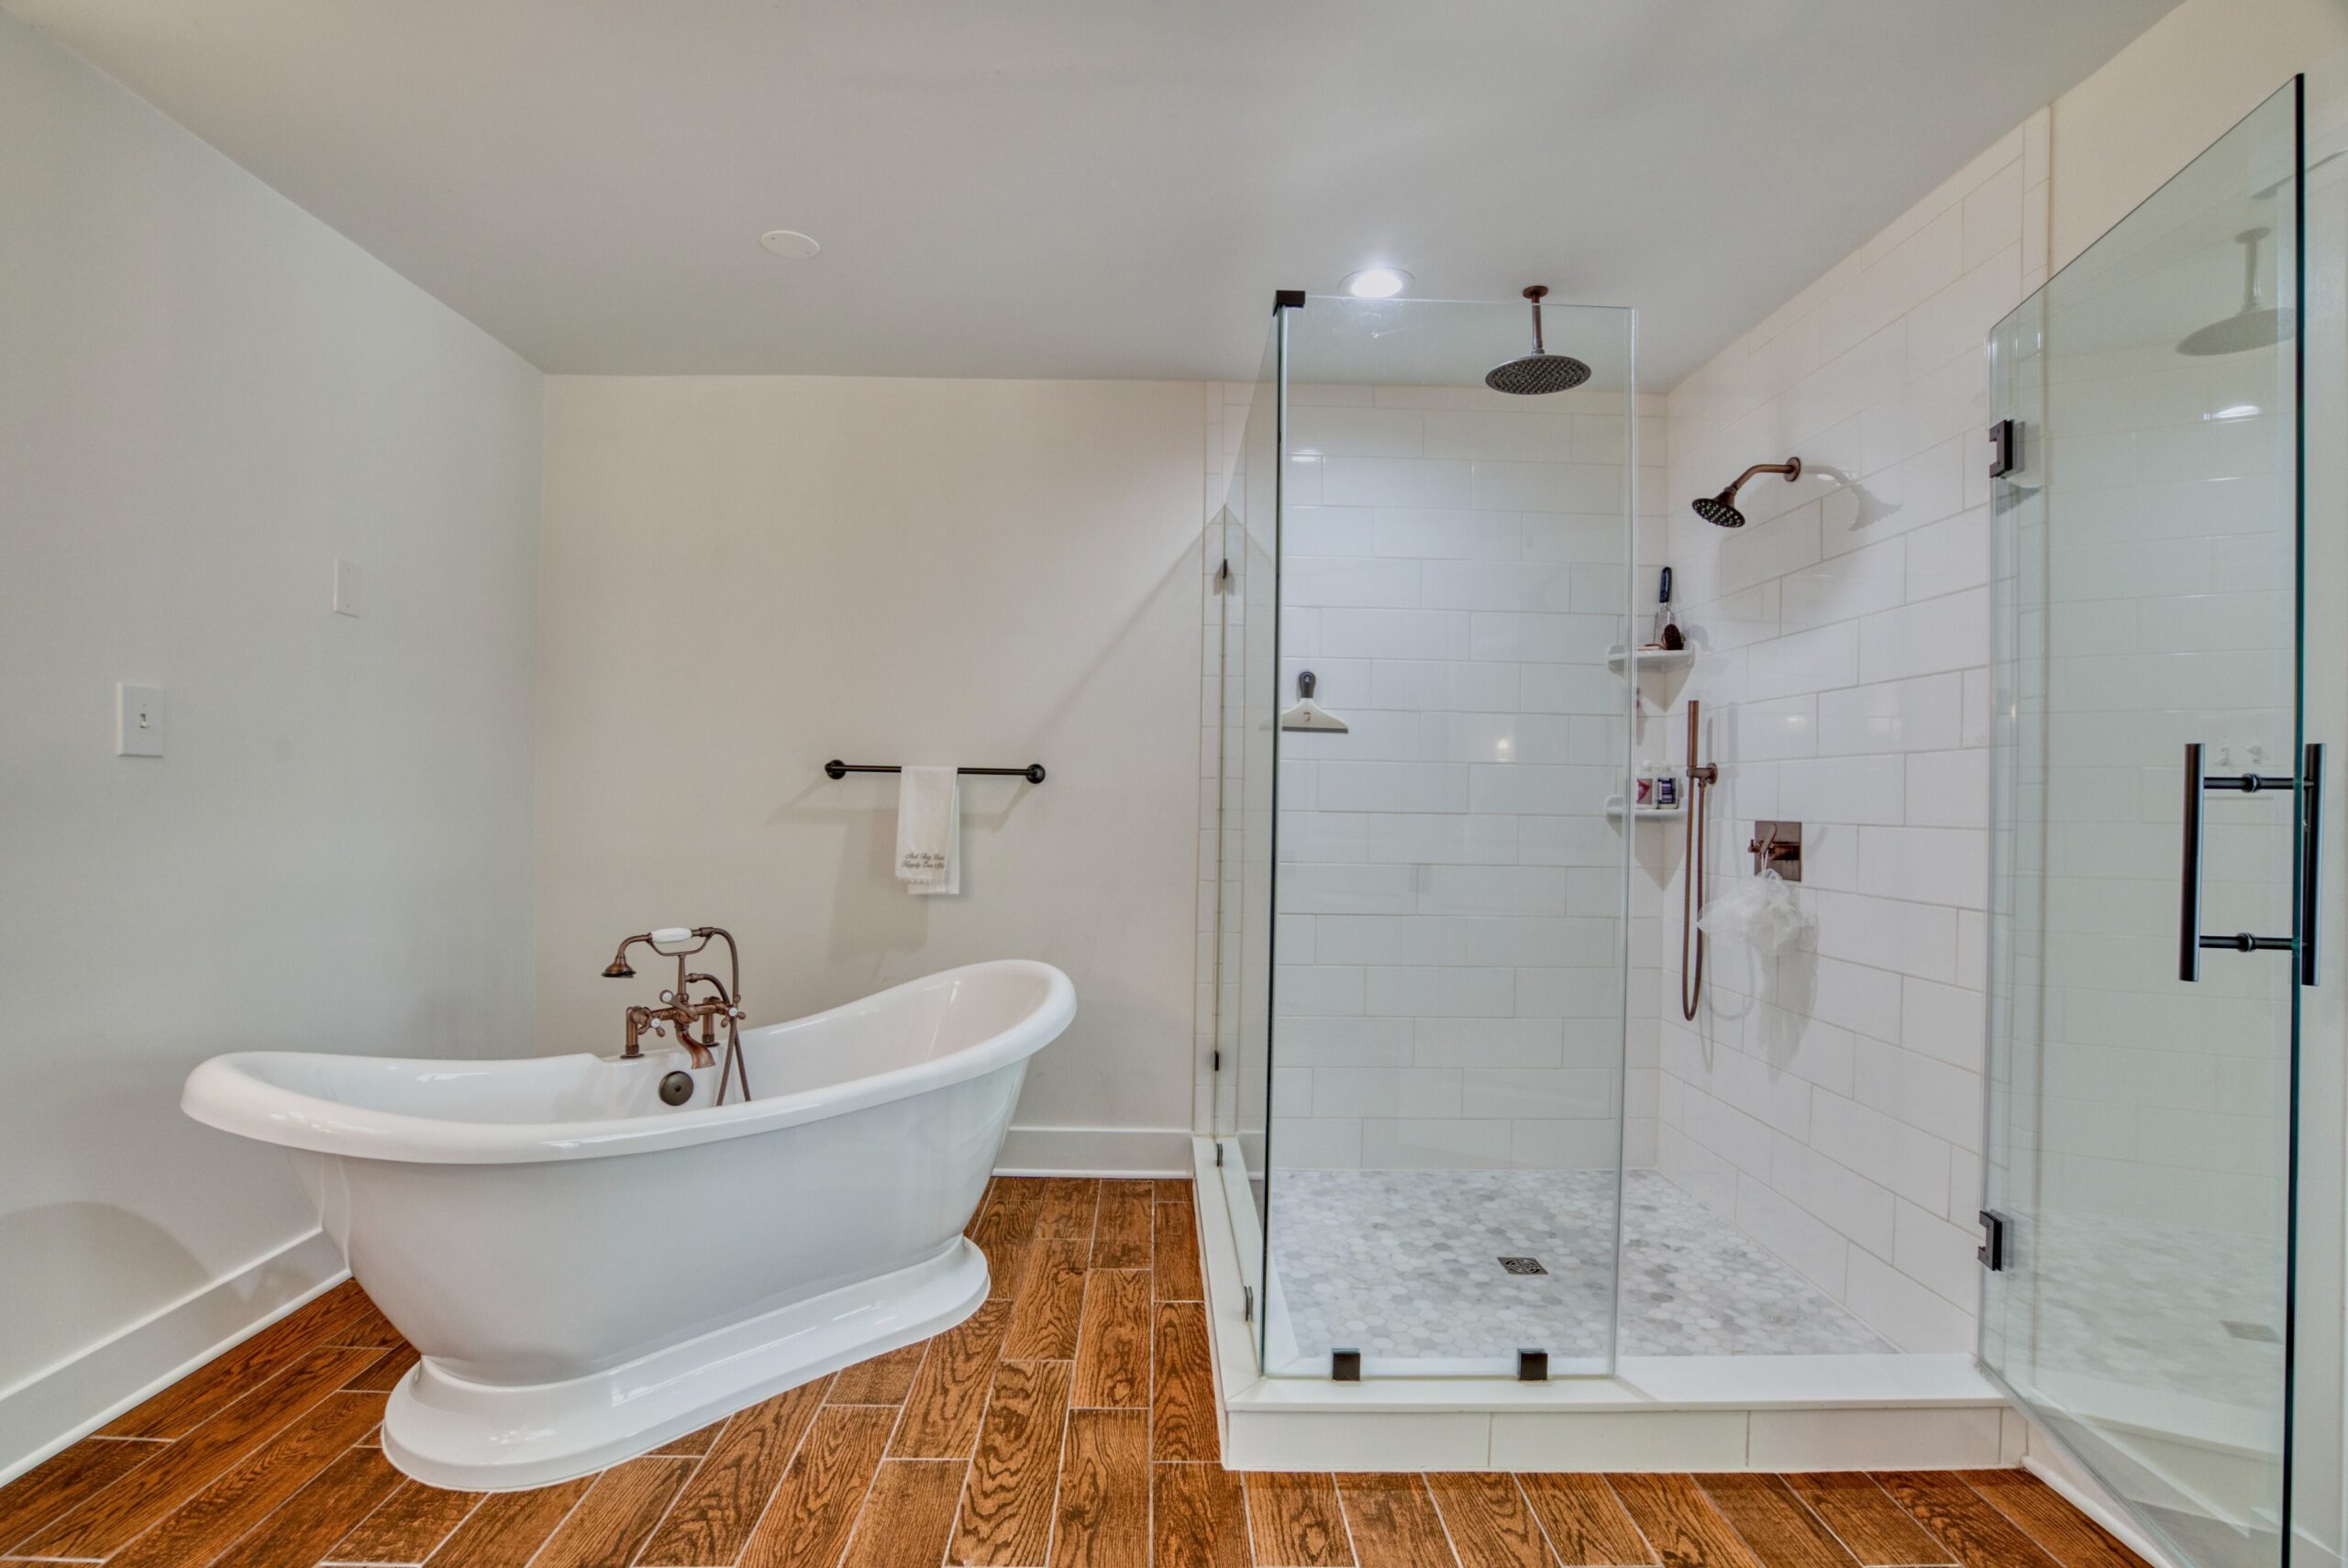 Professional interior photo of 209 Norwood Road, Annapolis, MD - showing the primary bathroom with soaking tub next to large glass shower with rain head